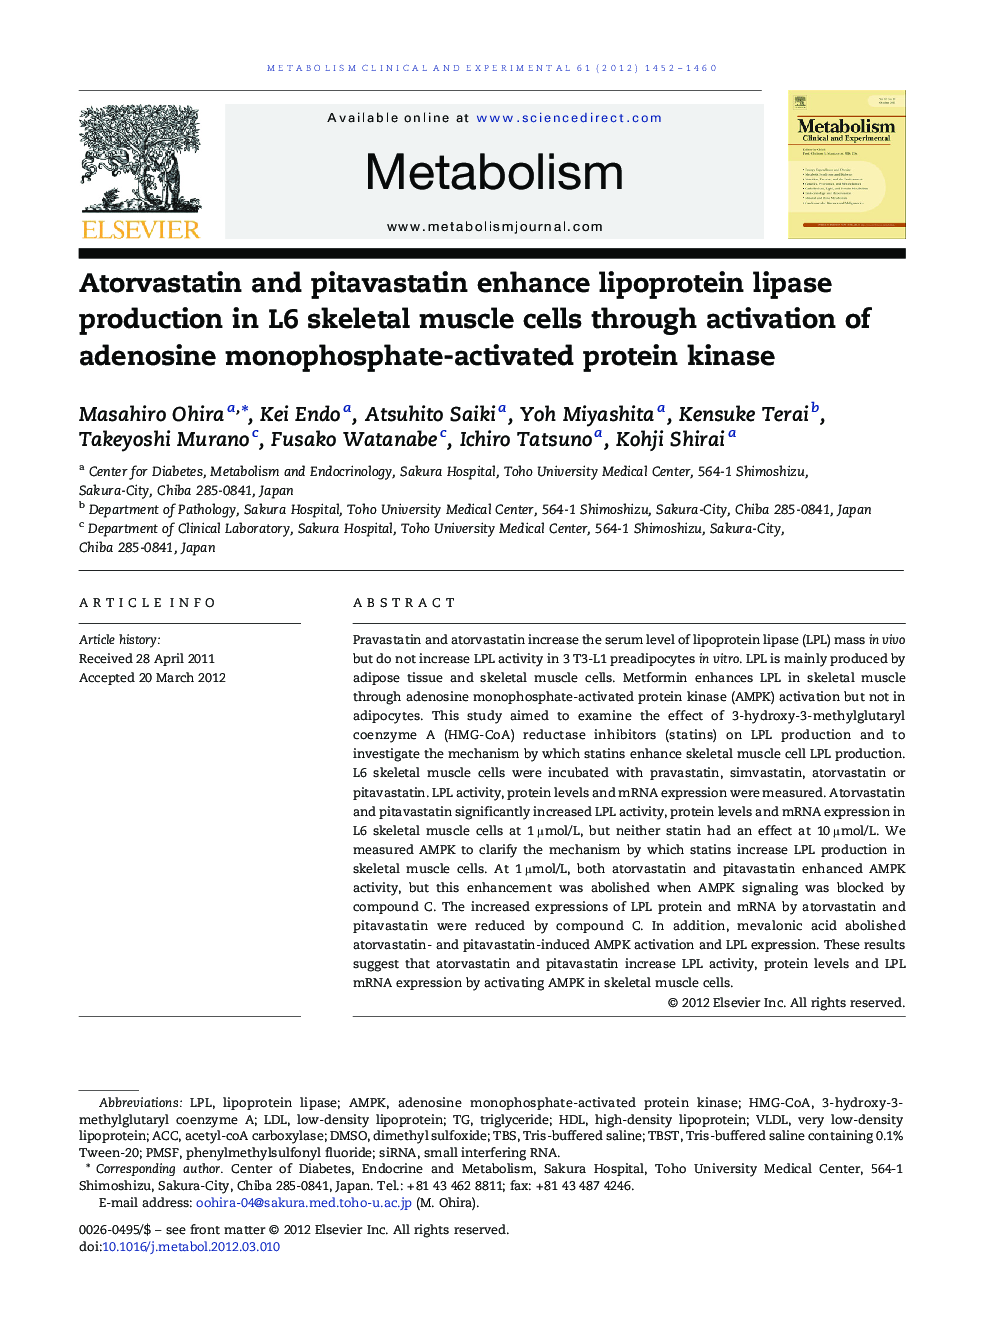 Basic ScienceAtorvastatin and pitavastatin enhance lipoprotein lipase production in L6 skeletal muscle cells through activation of adenosine monophosphate-activated protein kinase